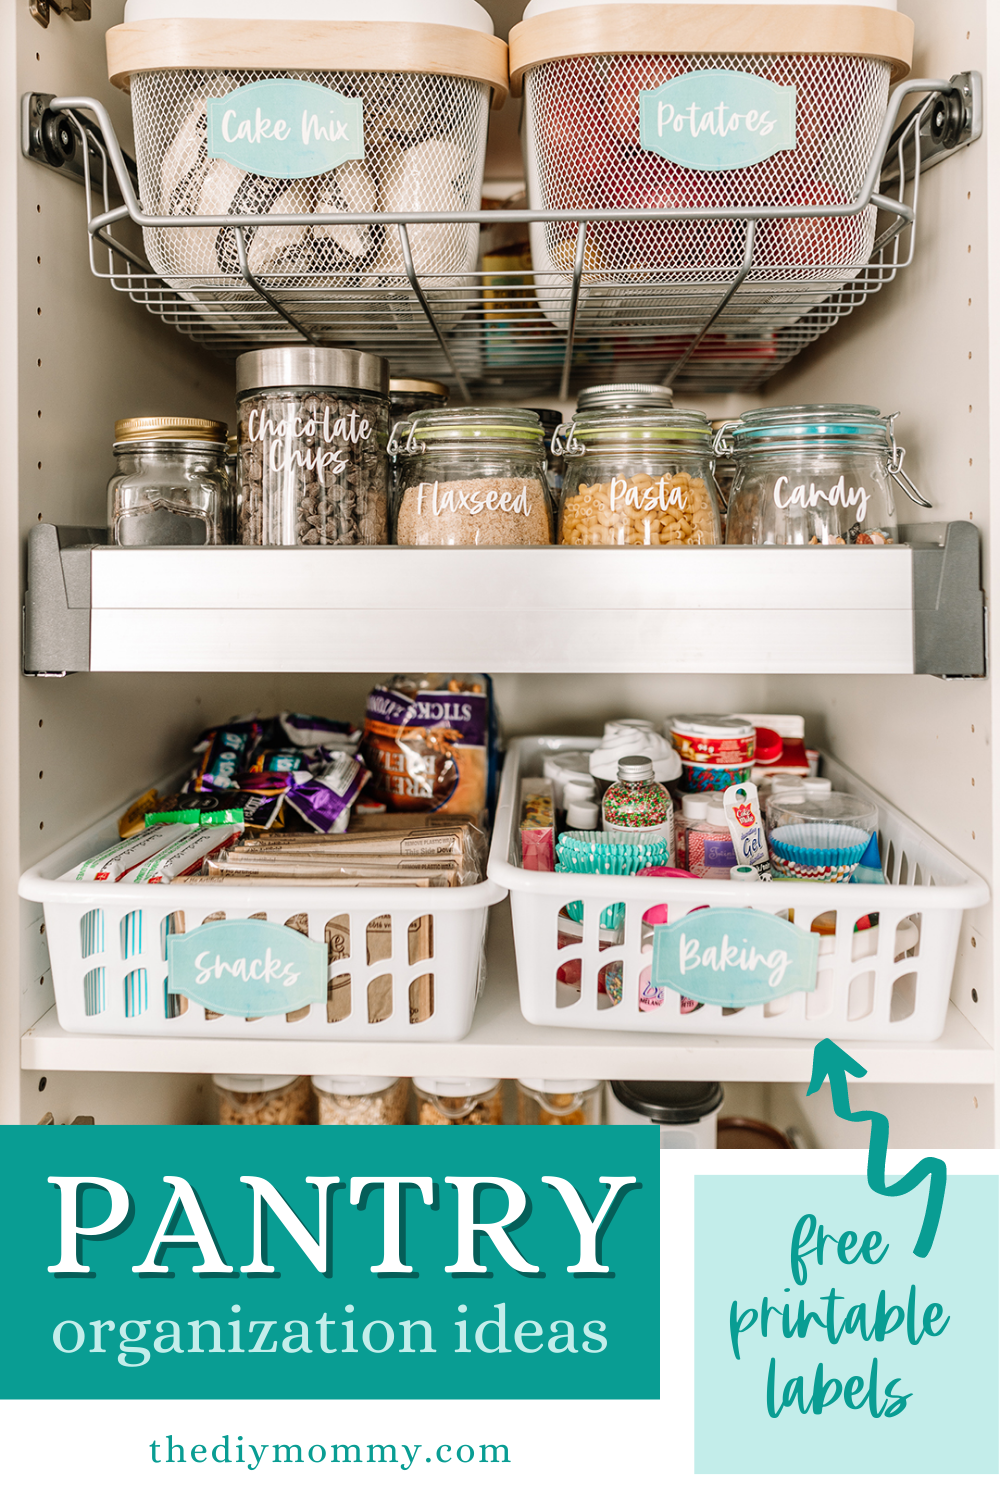 A small pantry is organized using pull-out shelves, bins, and containers.